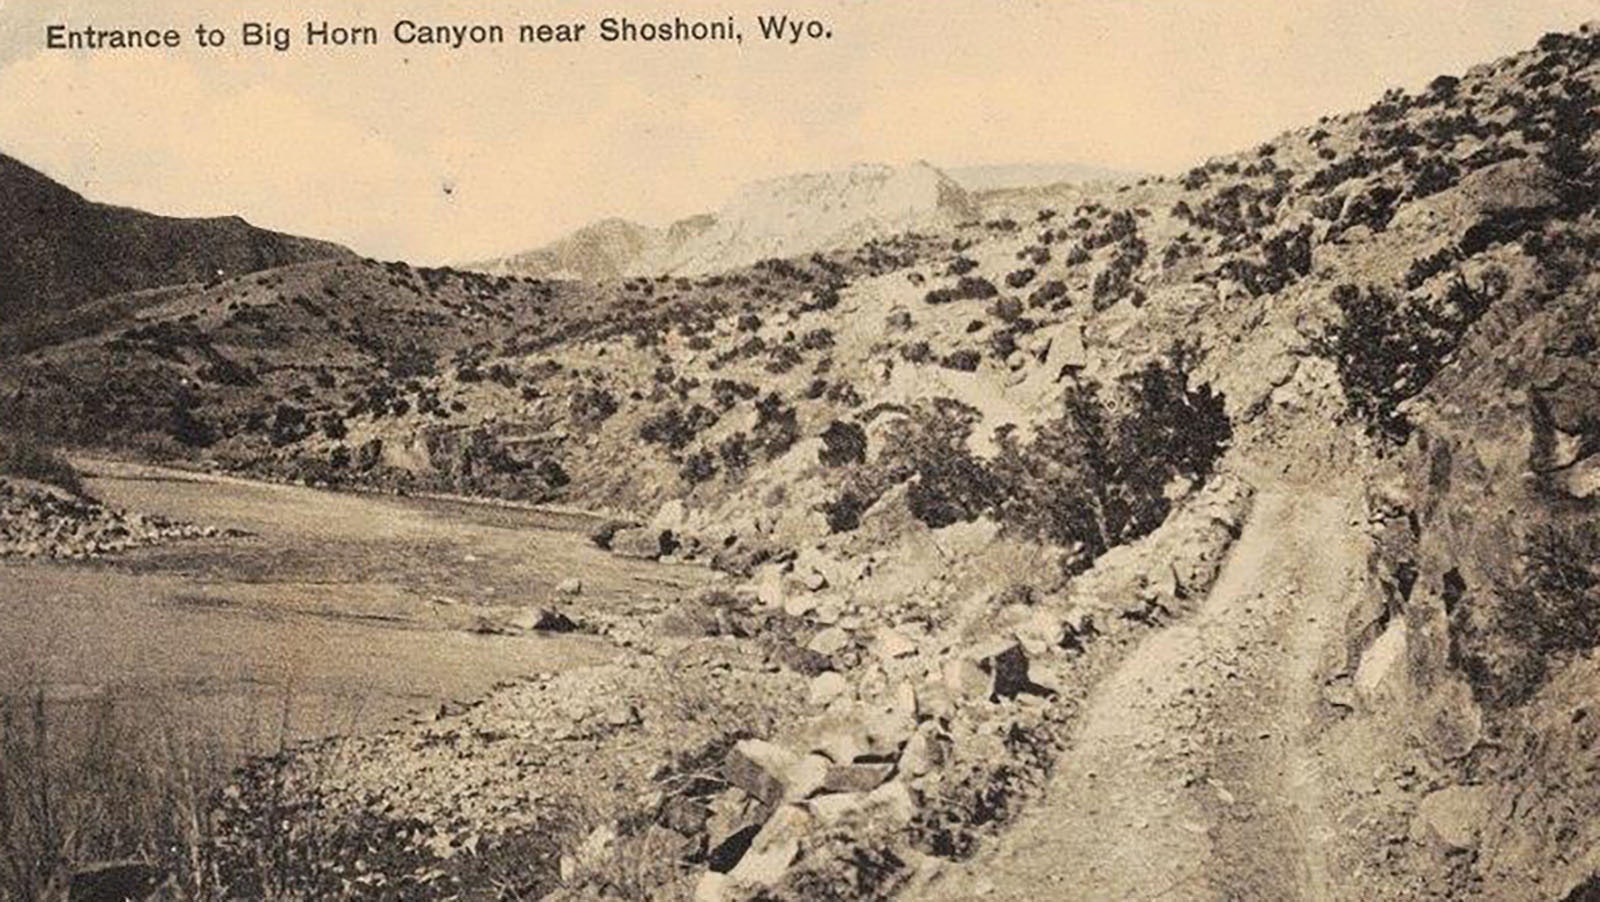 Postcard dated Aug. 2, 1909, showing the entrance to Big Horn Canyon. It would evolve into the Yellowstone Highway.